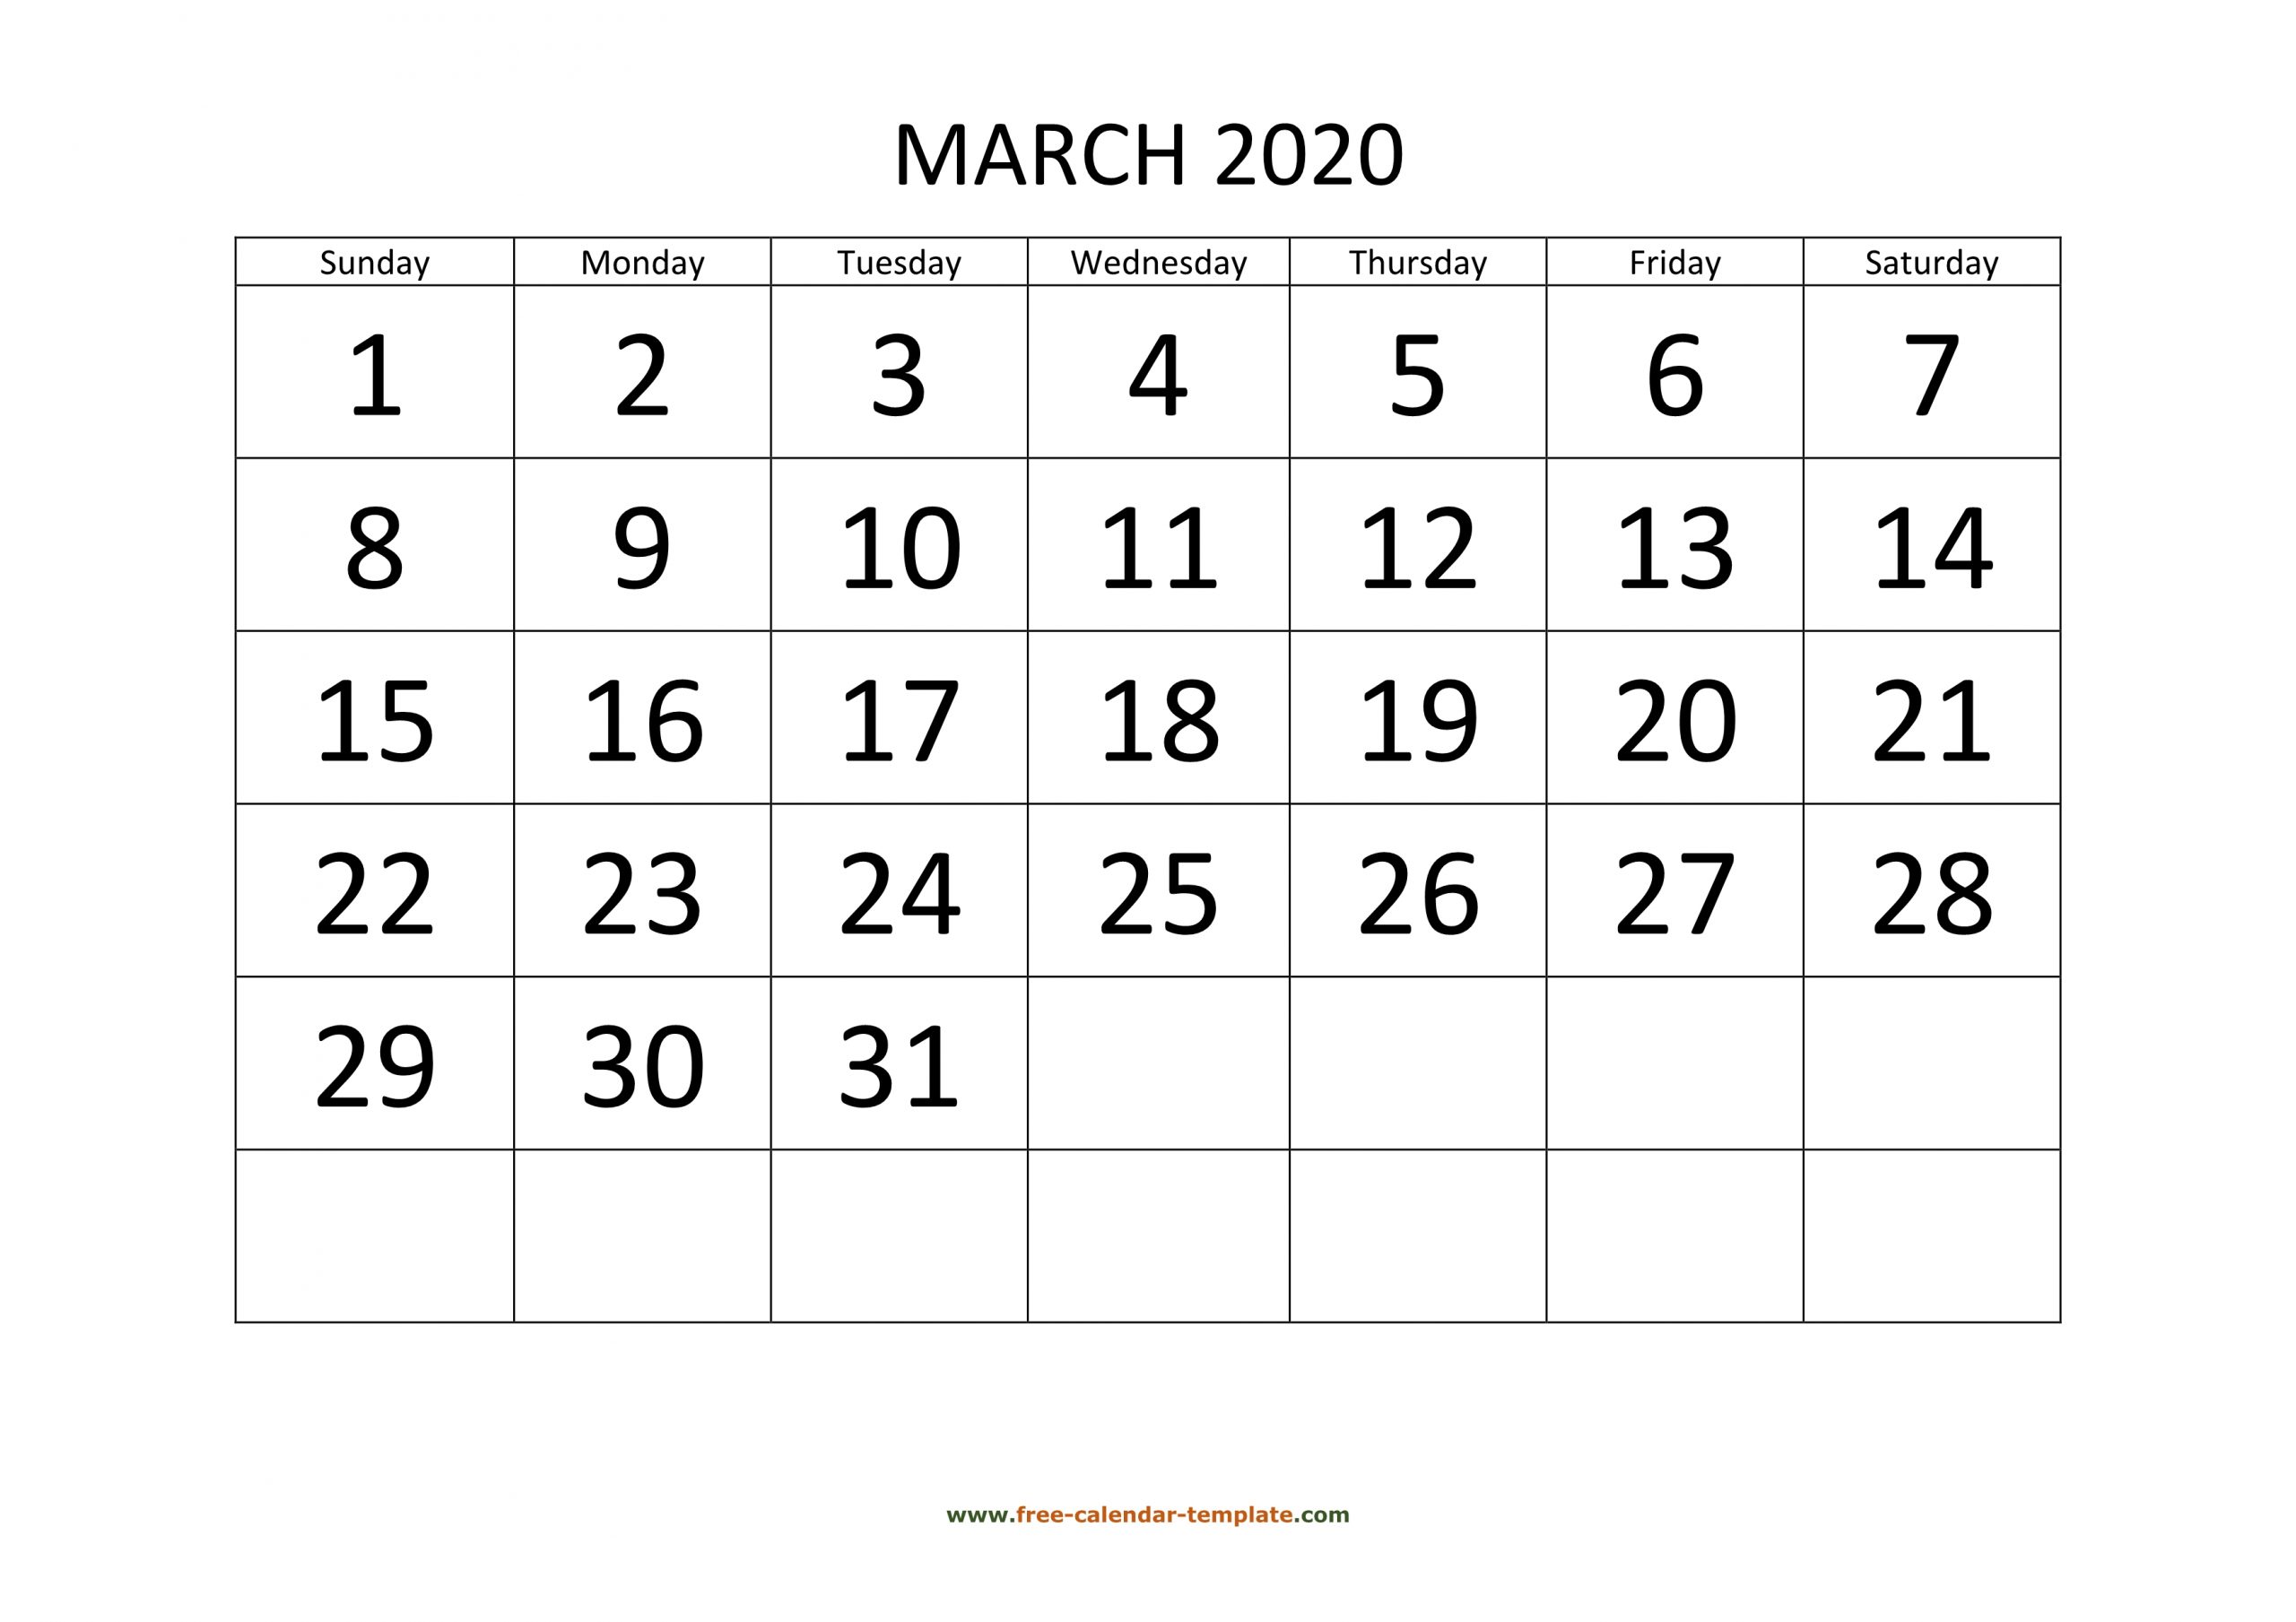 March 2020 Calendar Designed With Large Font (Horizontal